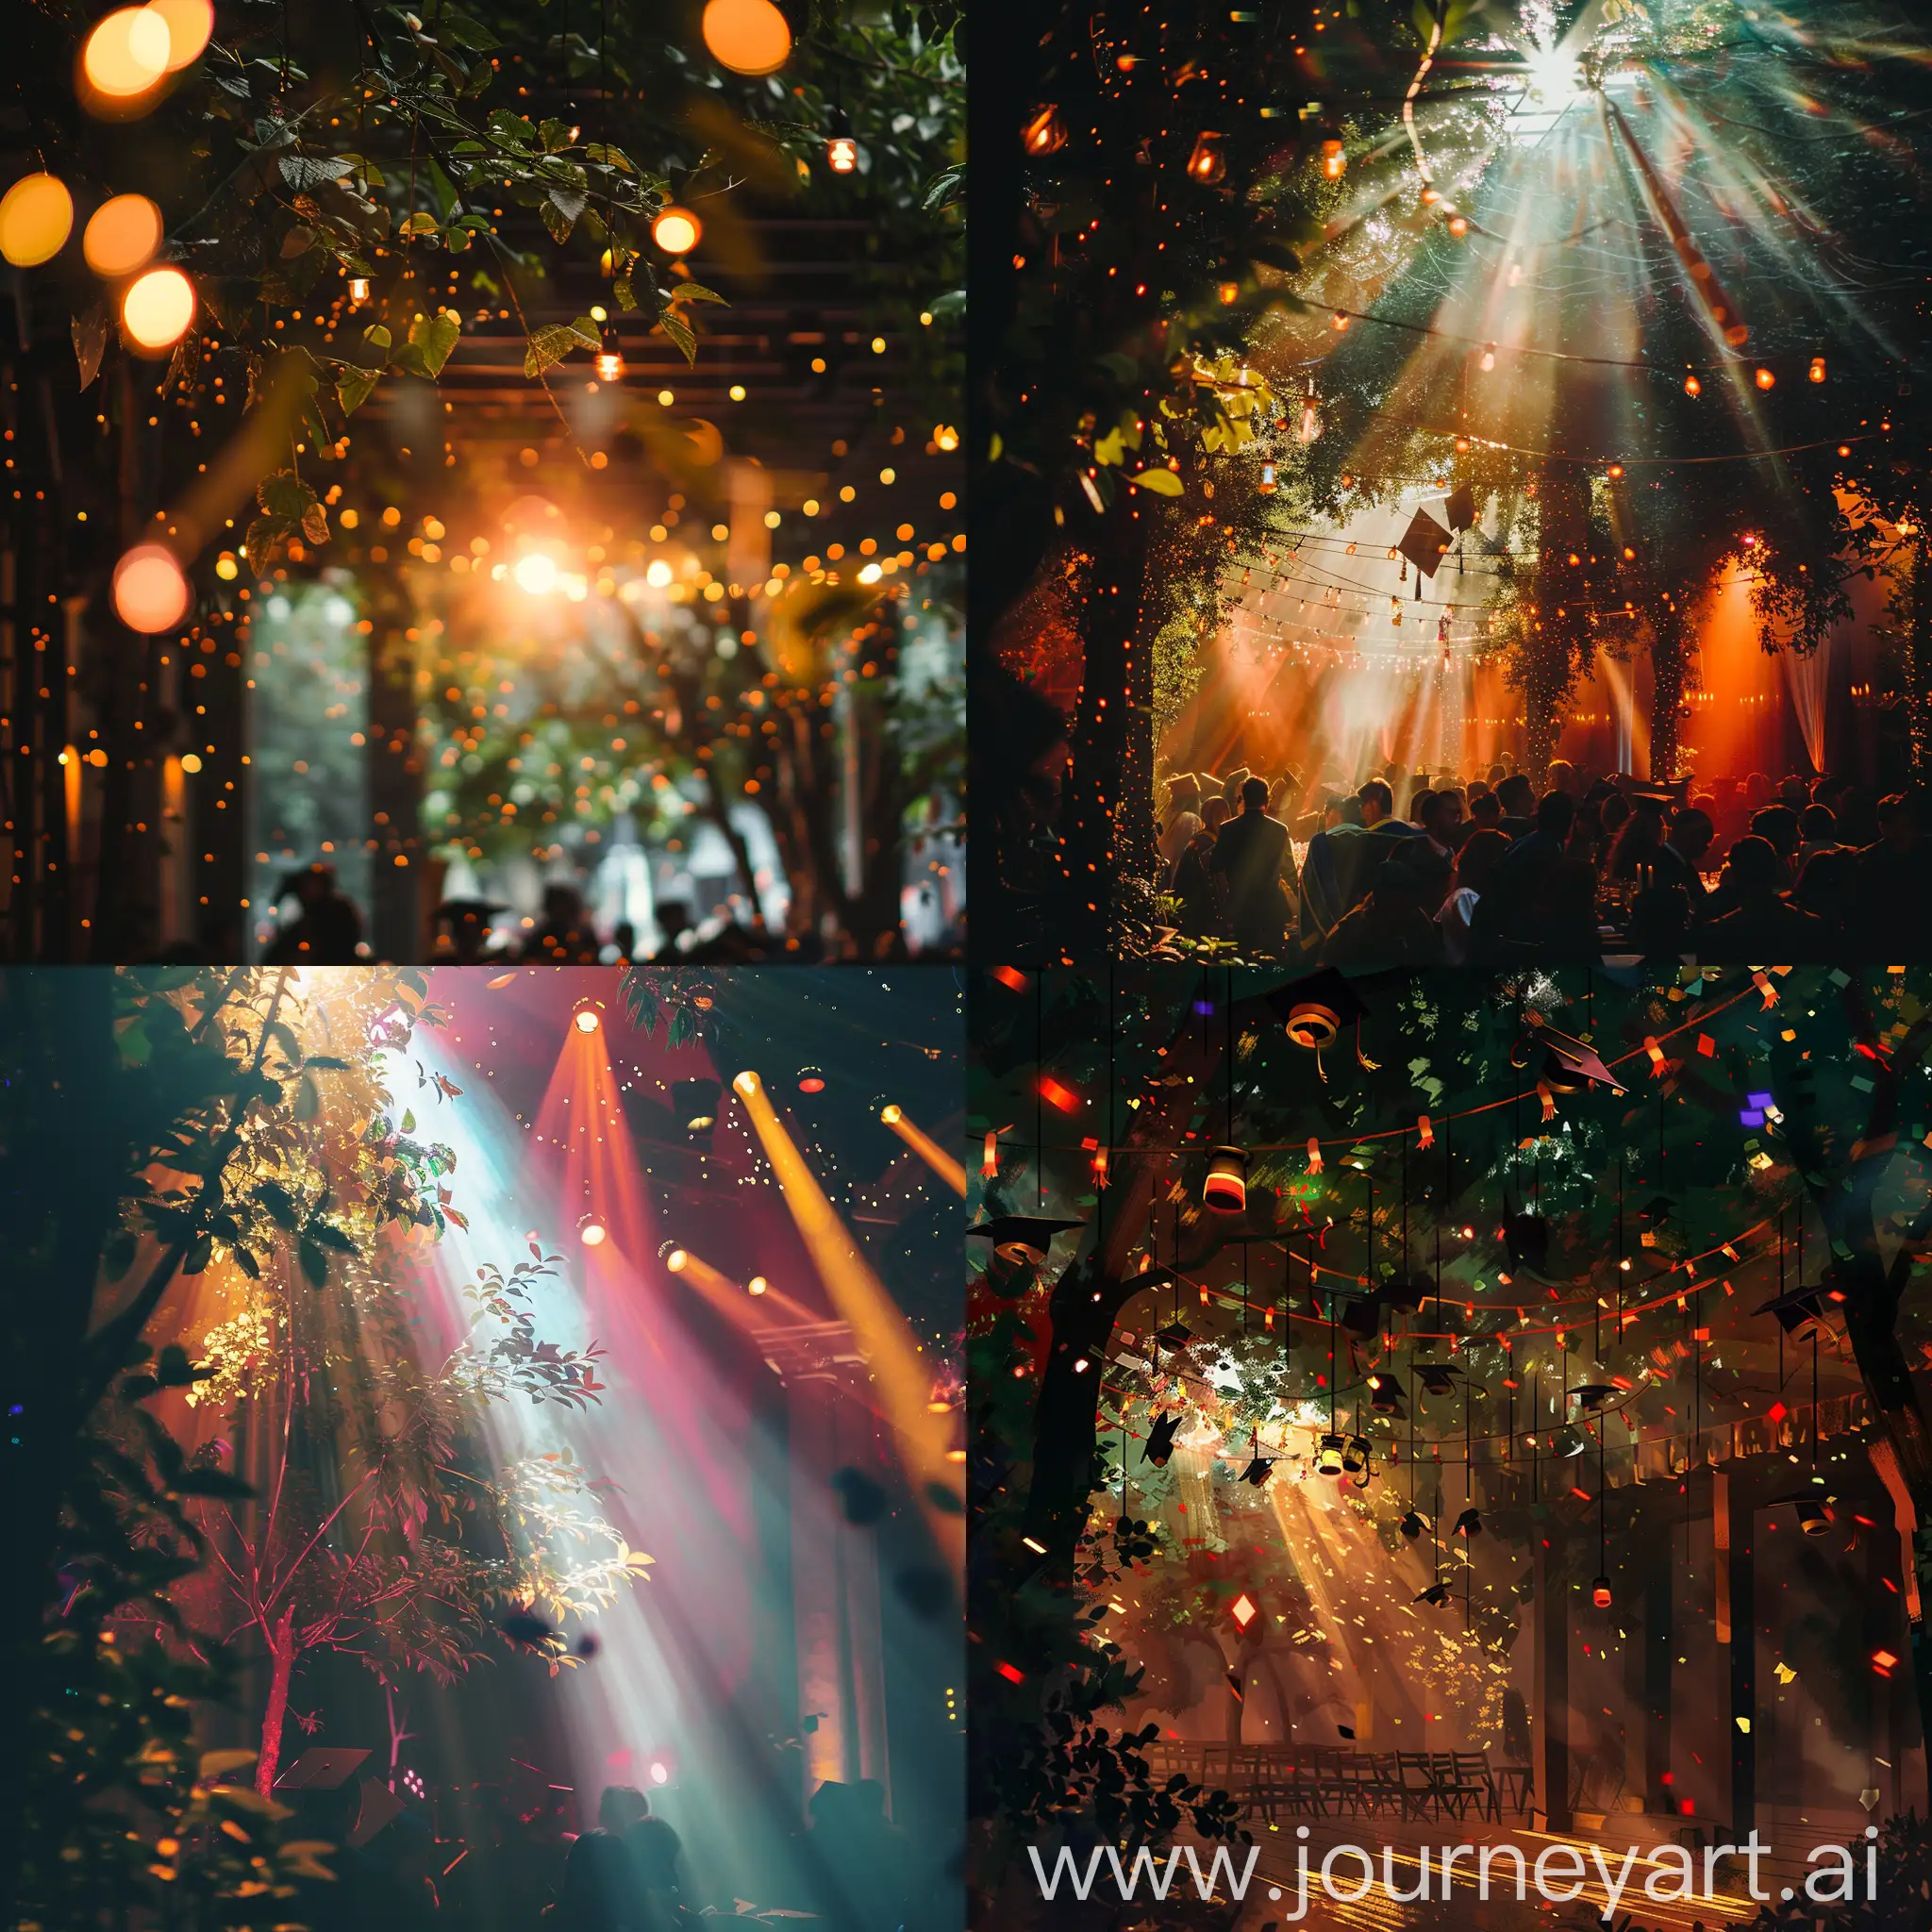 Background of chaos, evening with soft indoor lighting, cramped room, late hour, dappled sunlight through trees, diploma aloft, ceremony, late afternoon streaming, festive lighting, vibrant colours, fulfilment, inspiring, stage lights illuminating, twinkling.